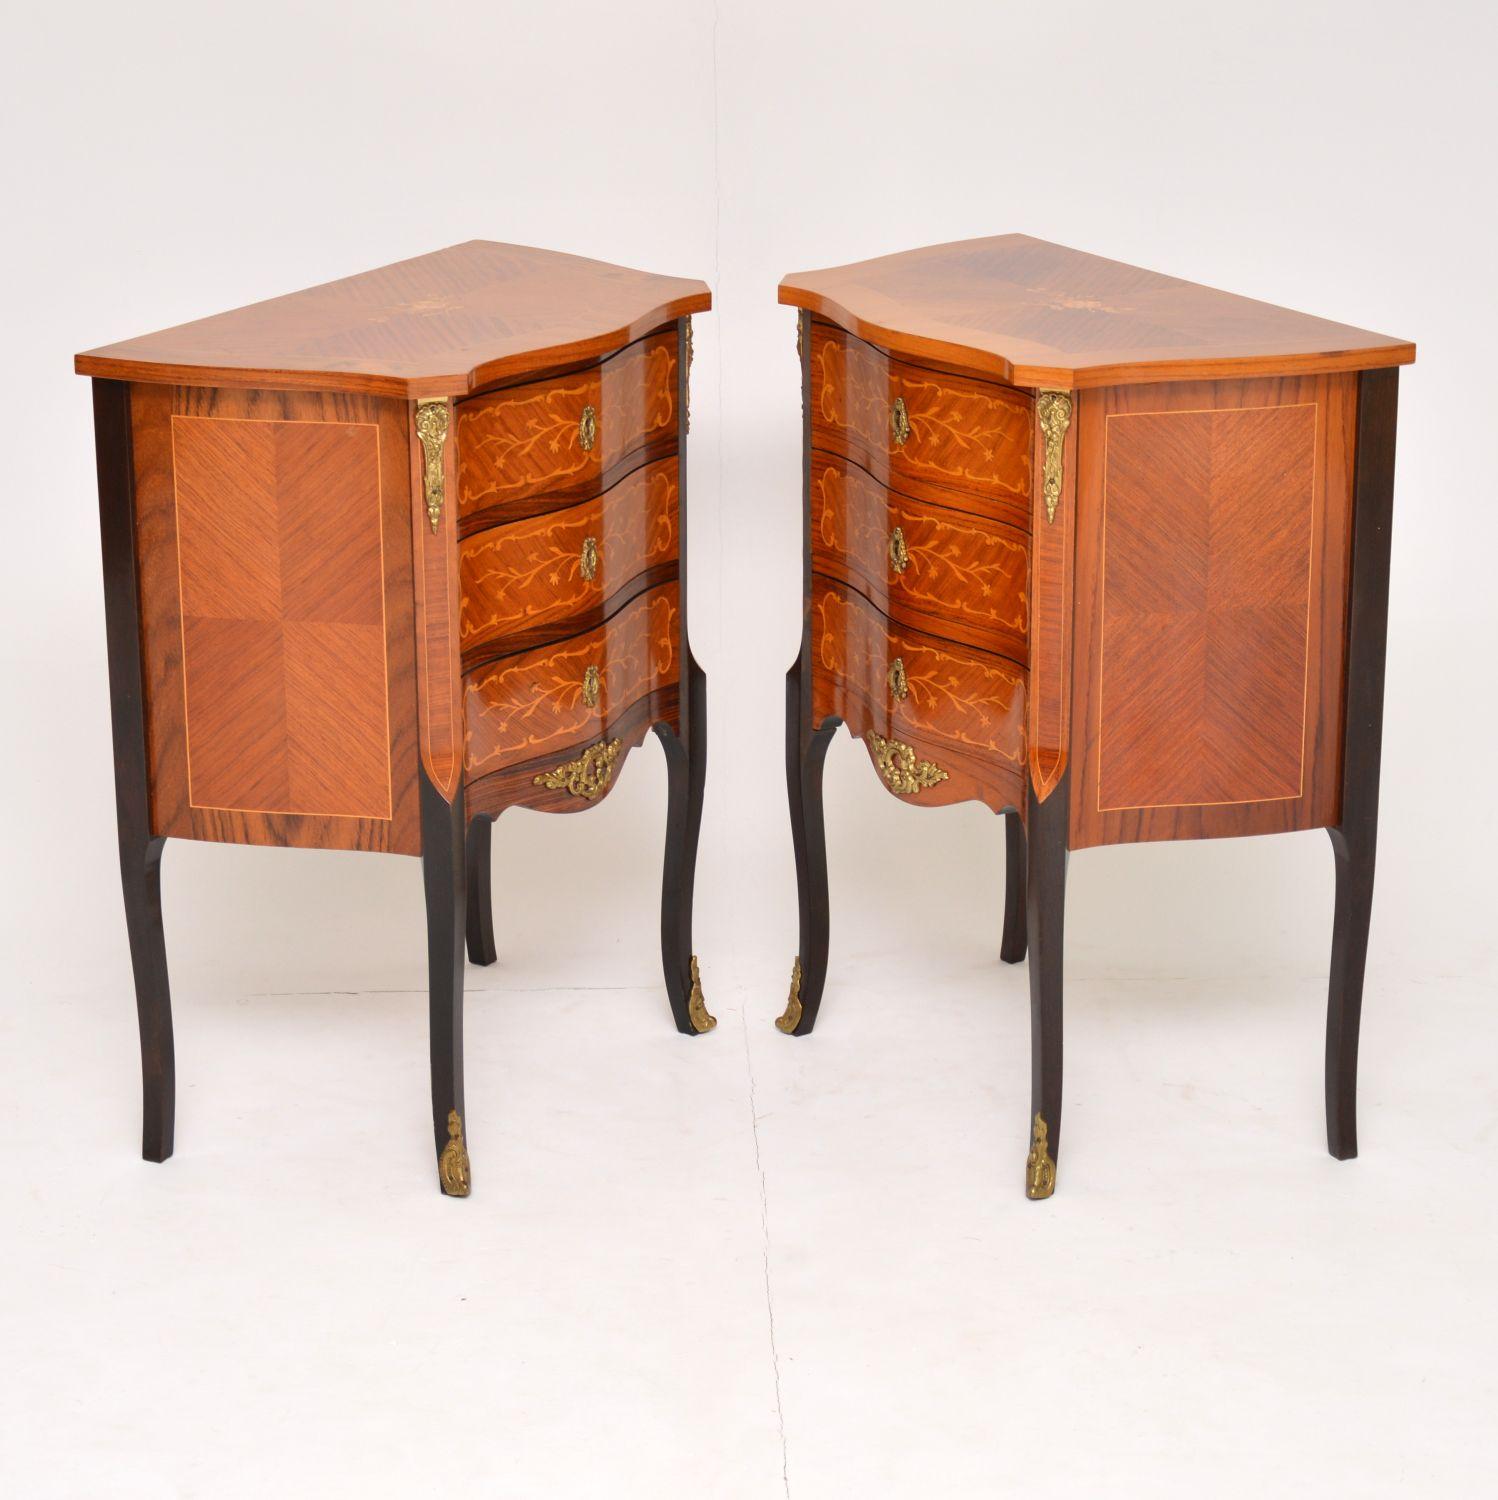 Mid-20th Century Pair of Antique French Inlaid Kingwood Chests